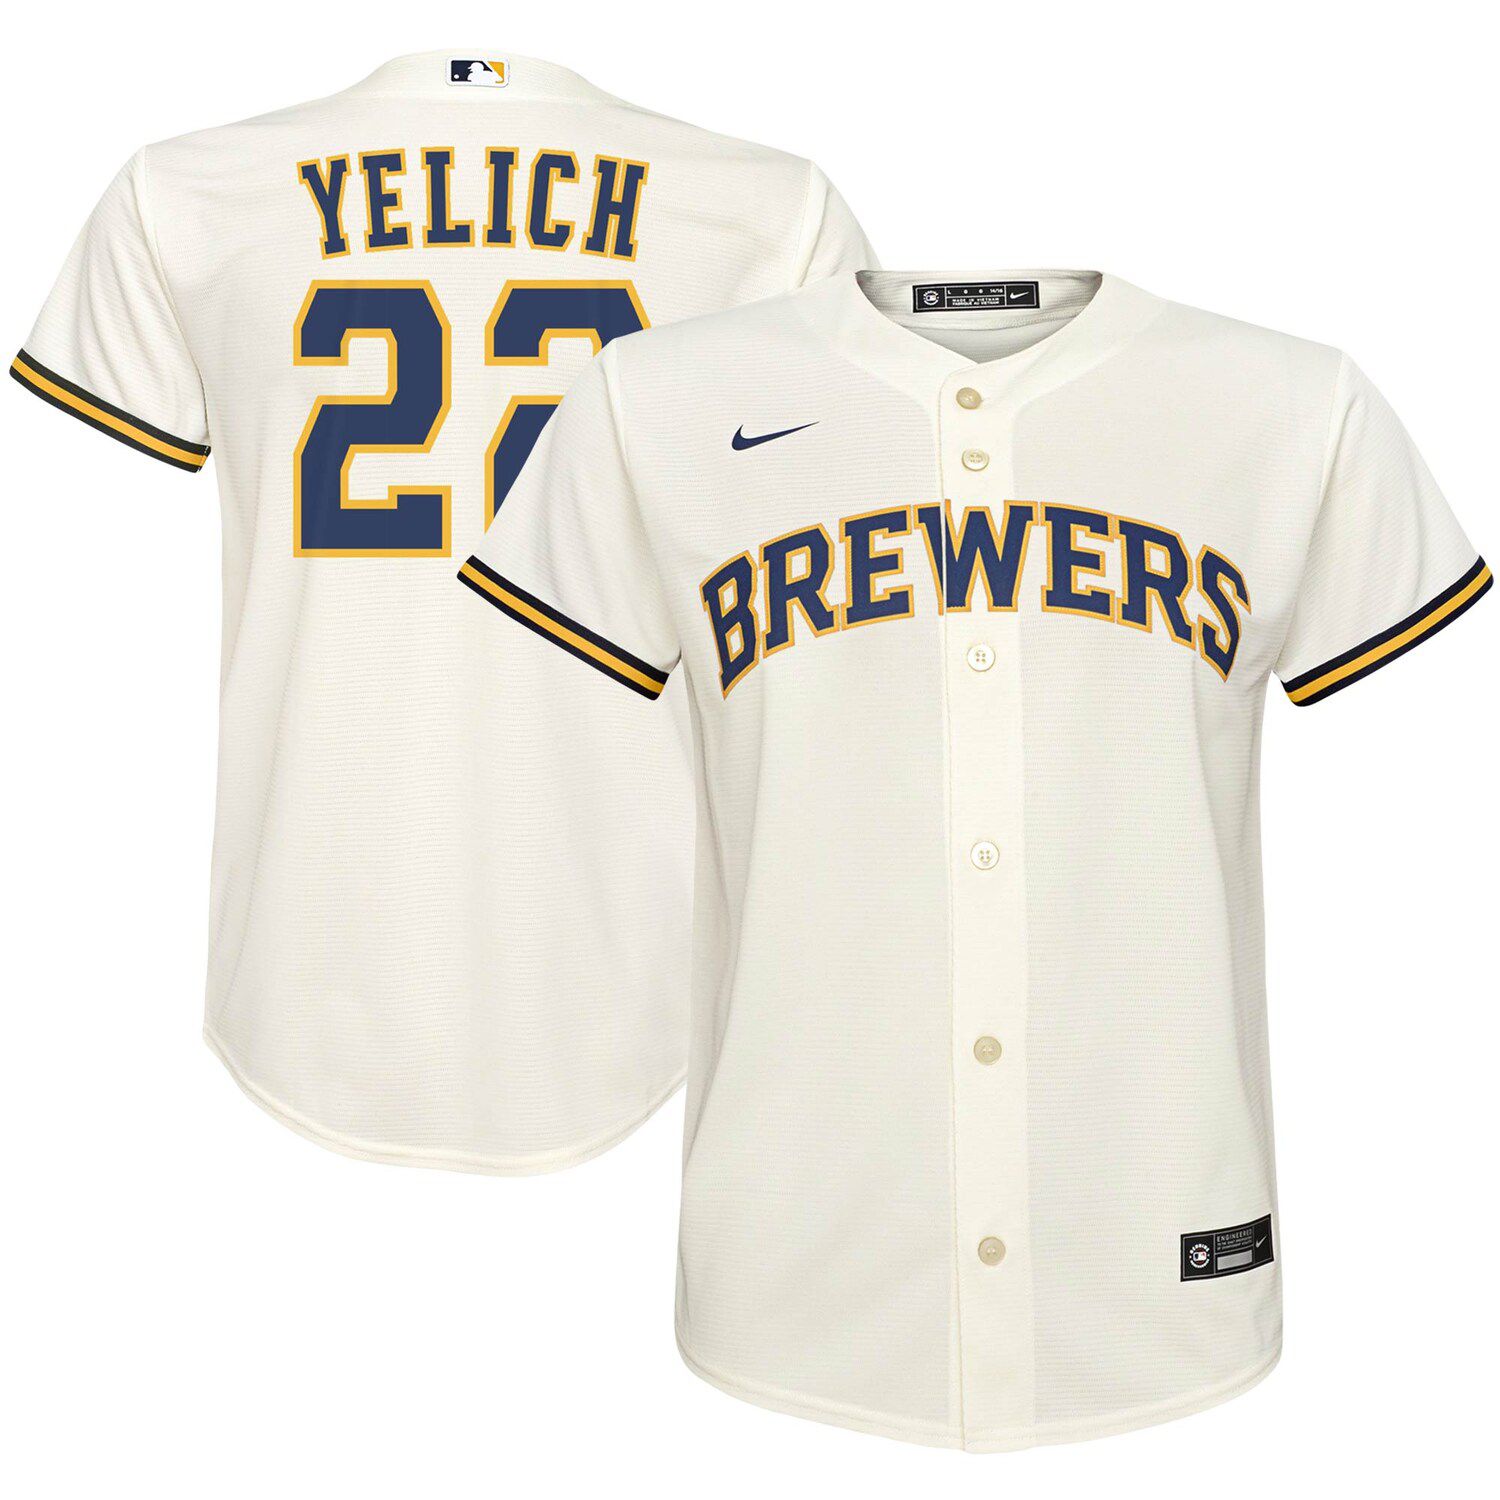 Christian Yelich Brewers jersey